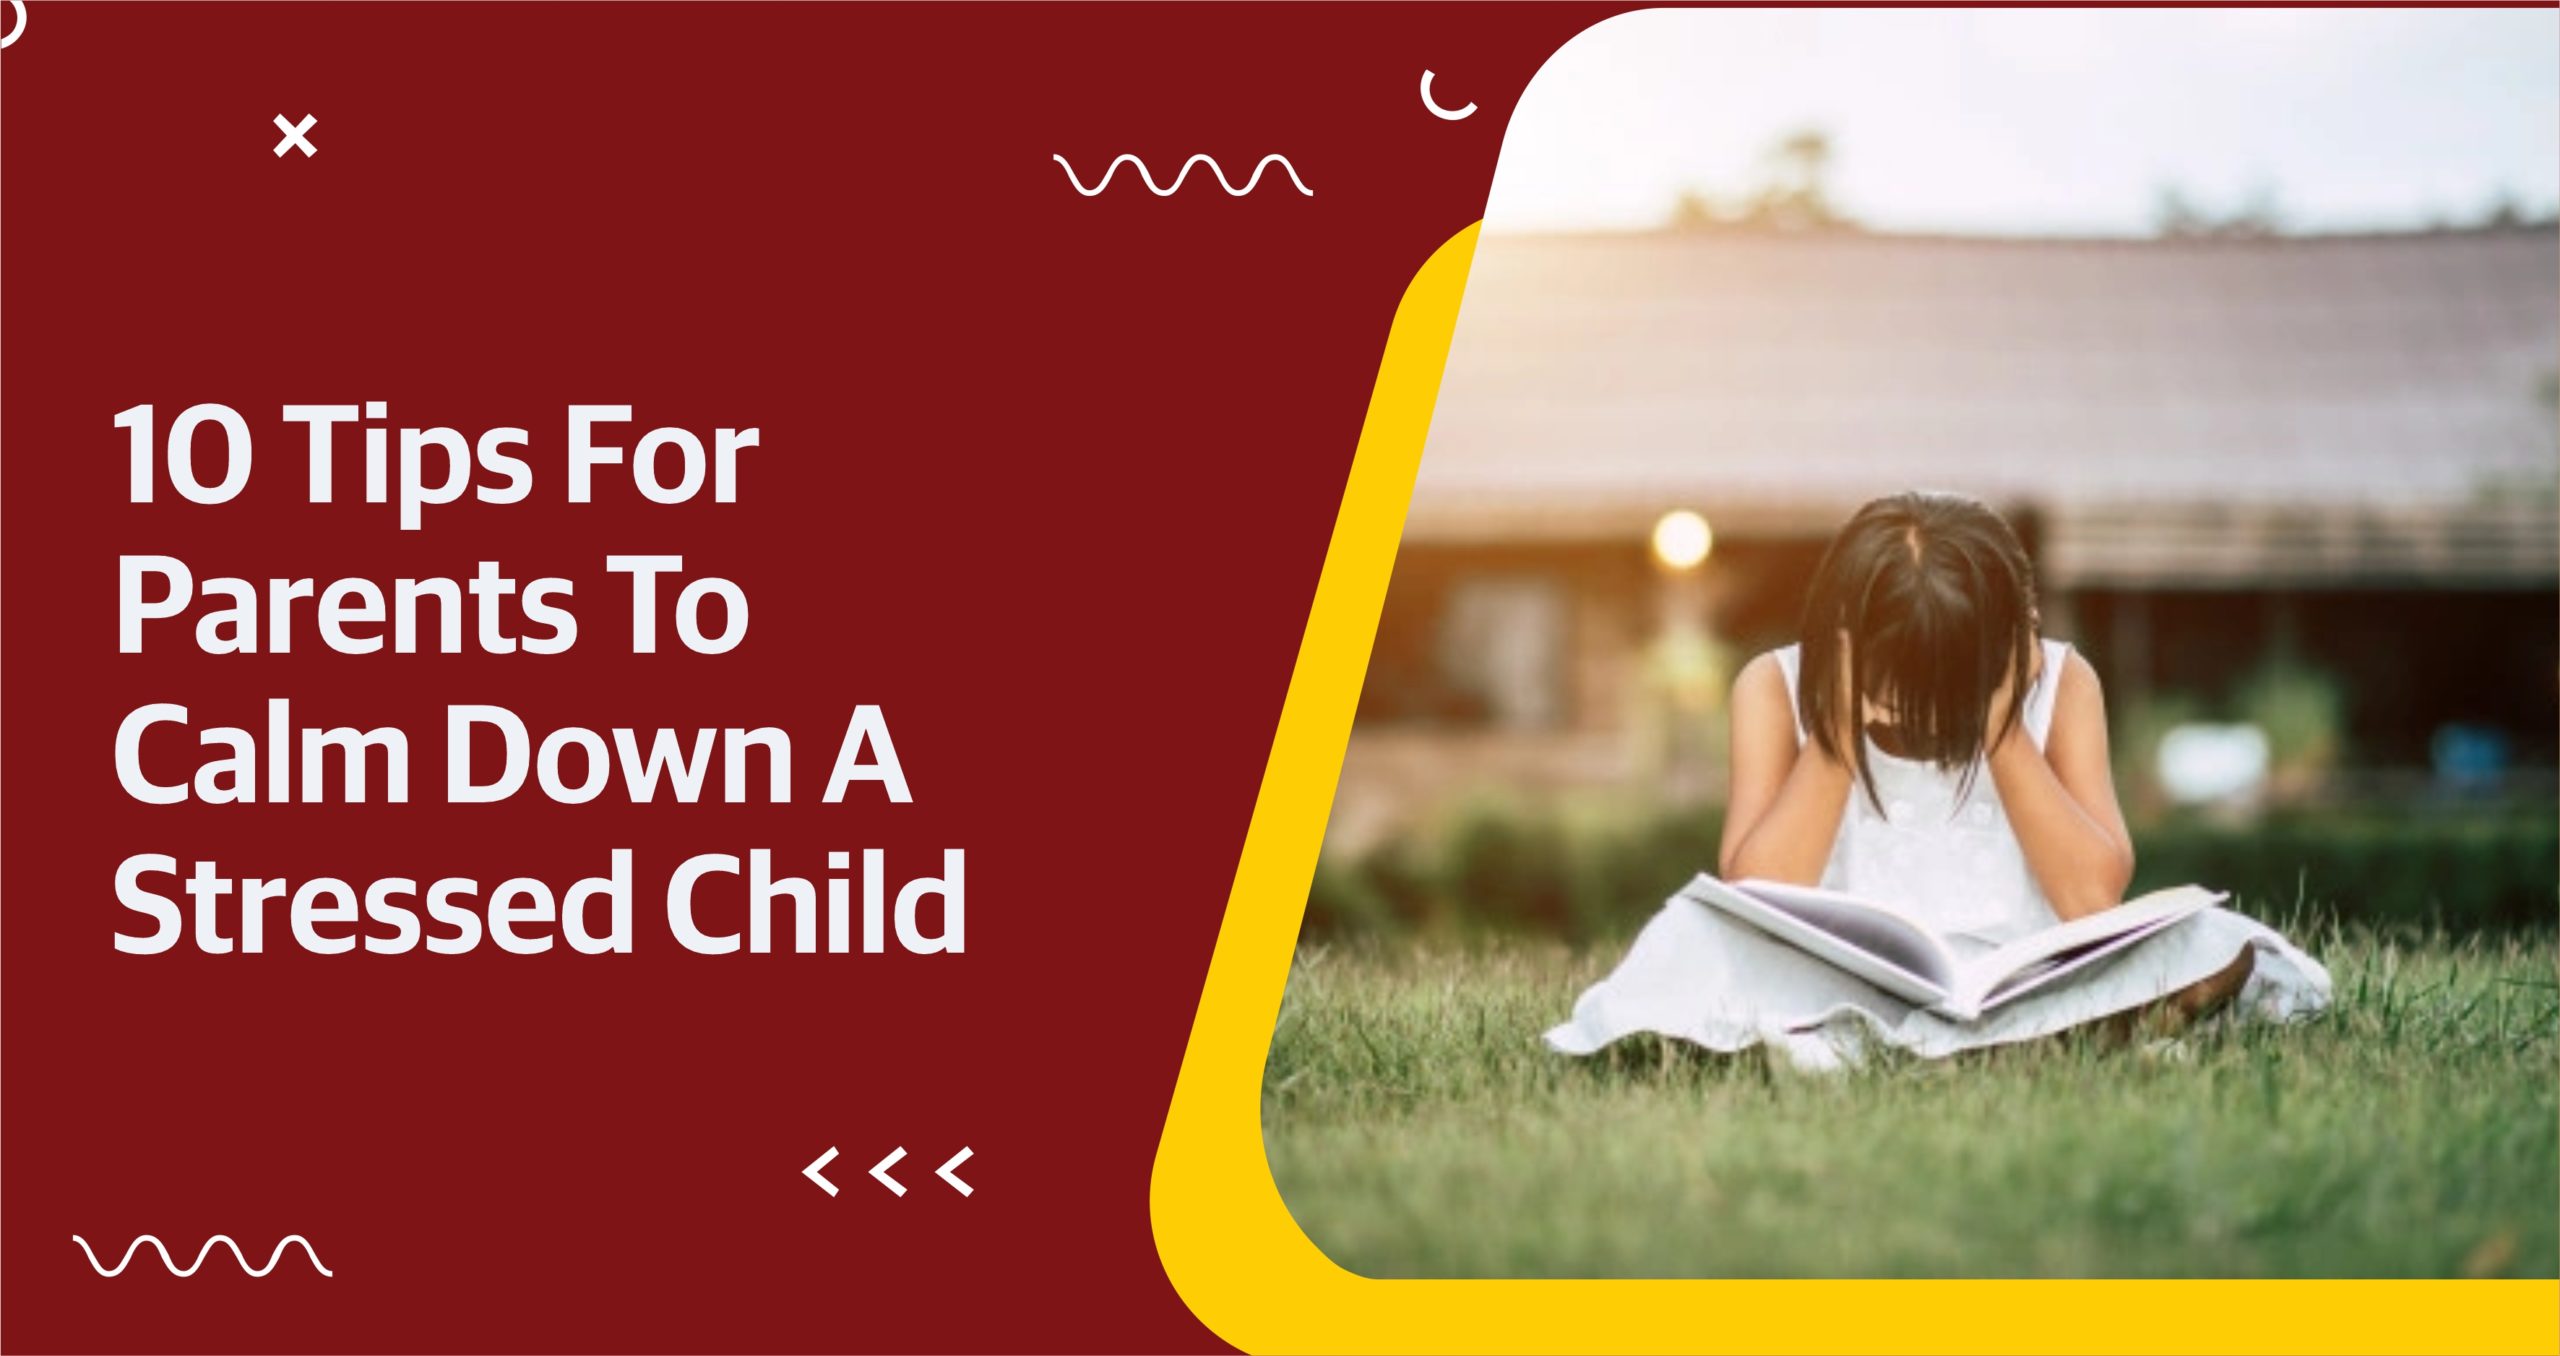 10 Tips for Parents to Calm Down a Stressed Child